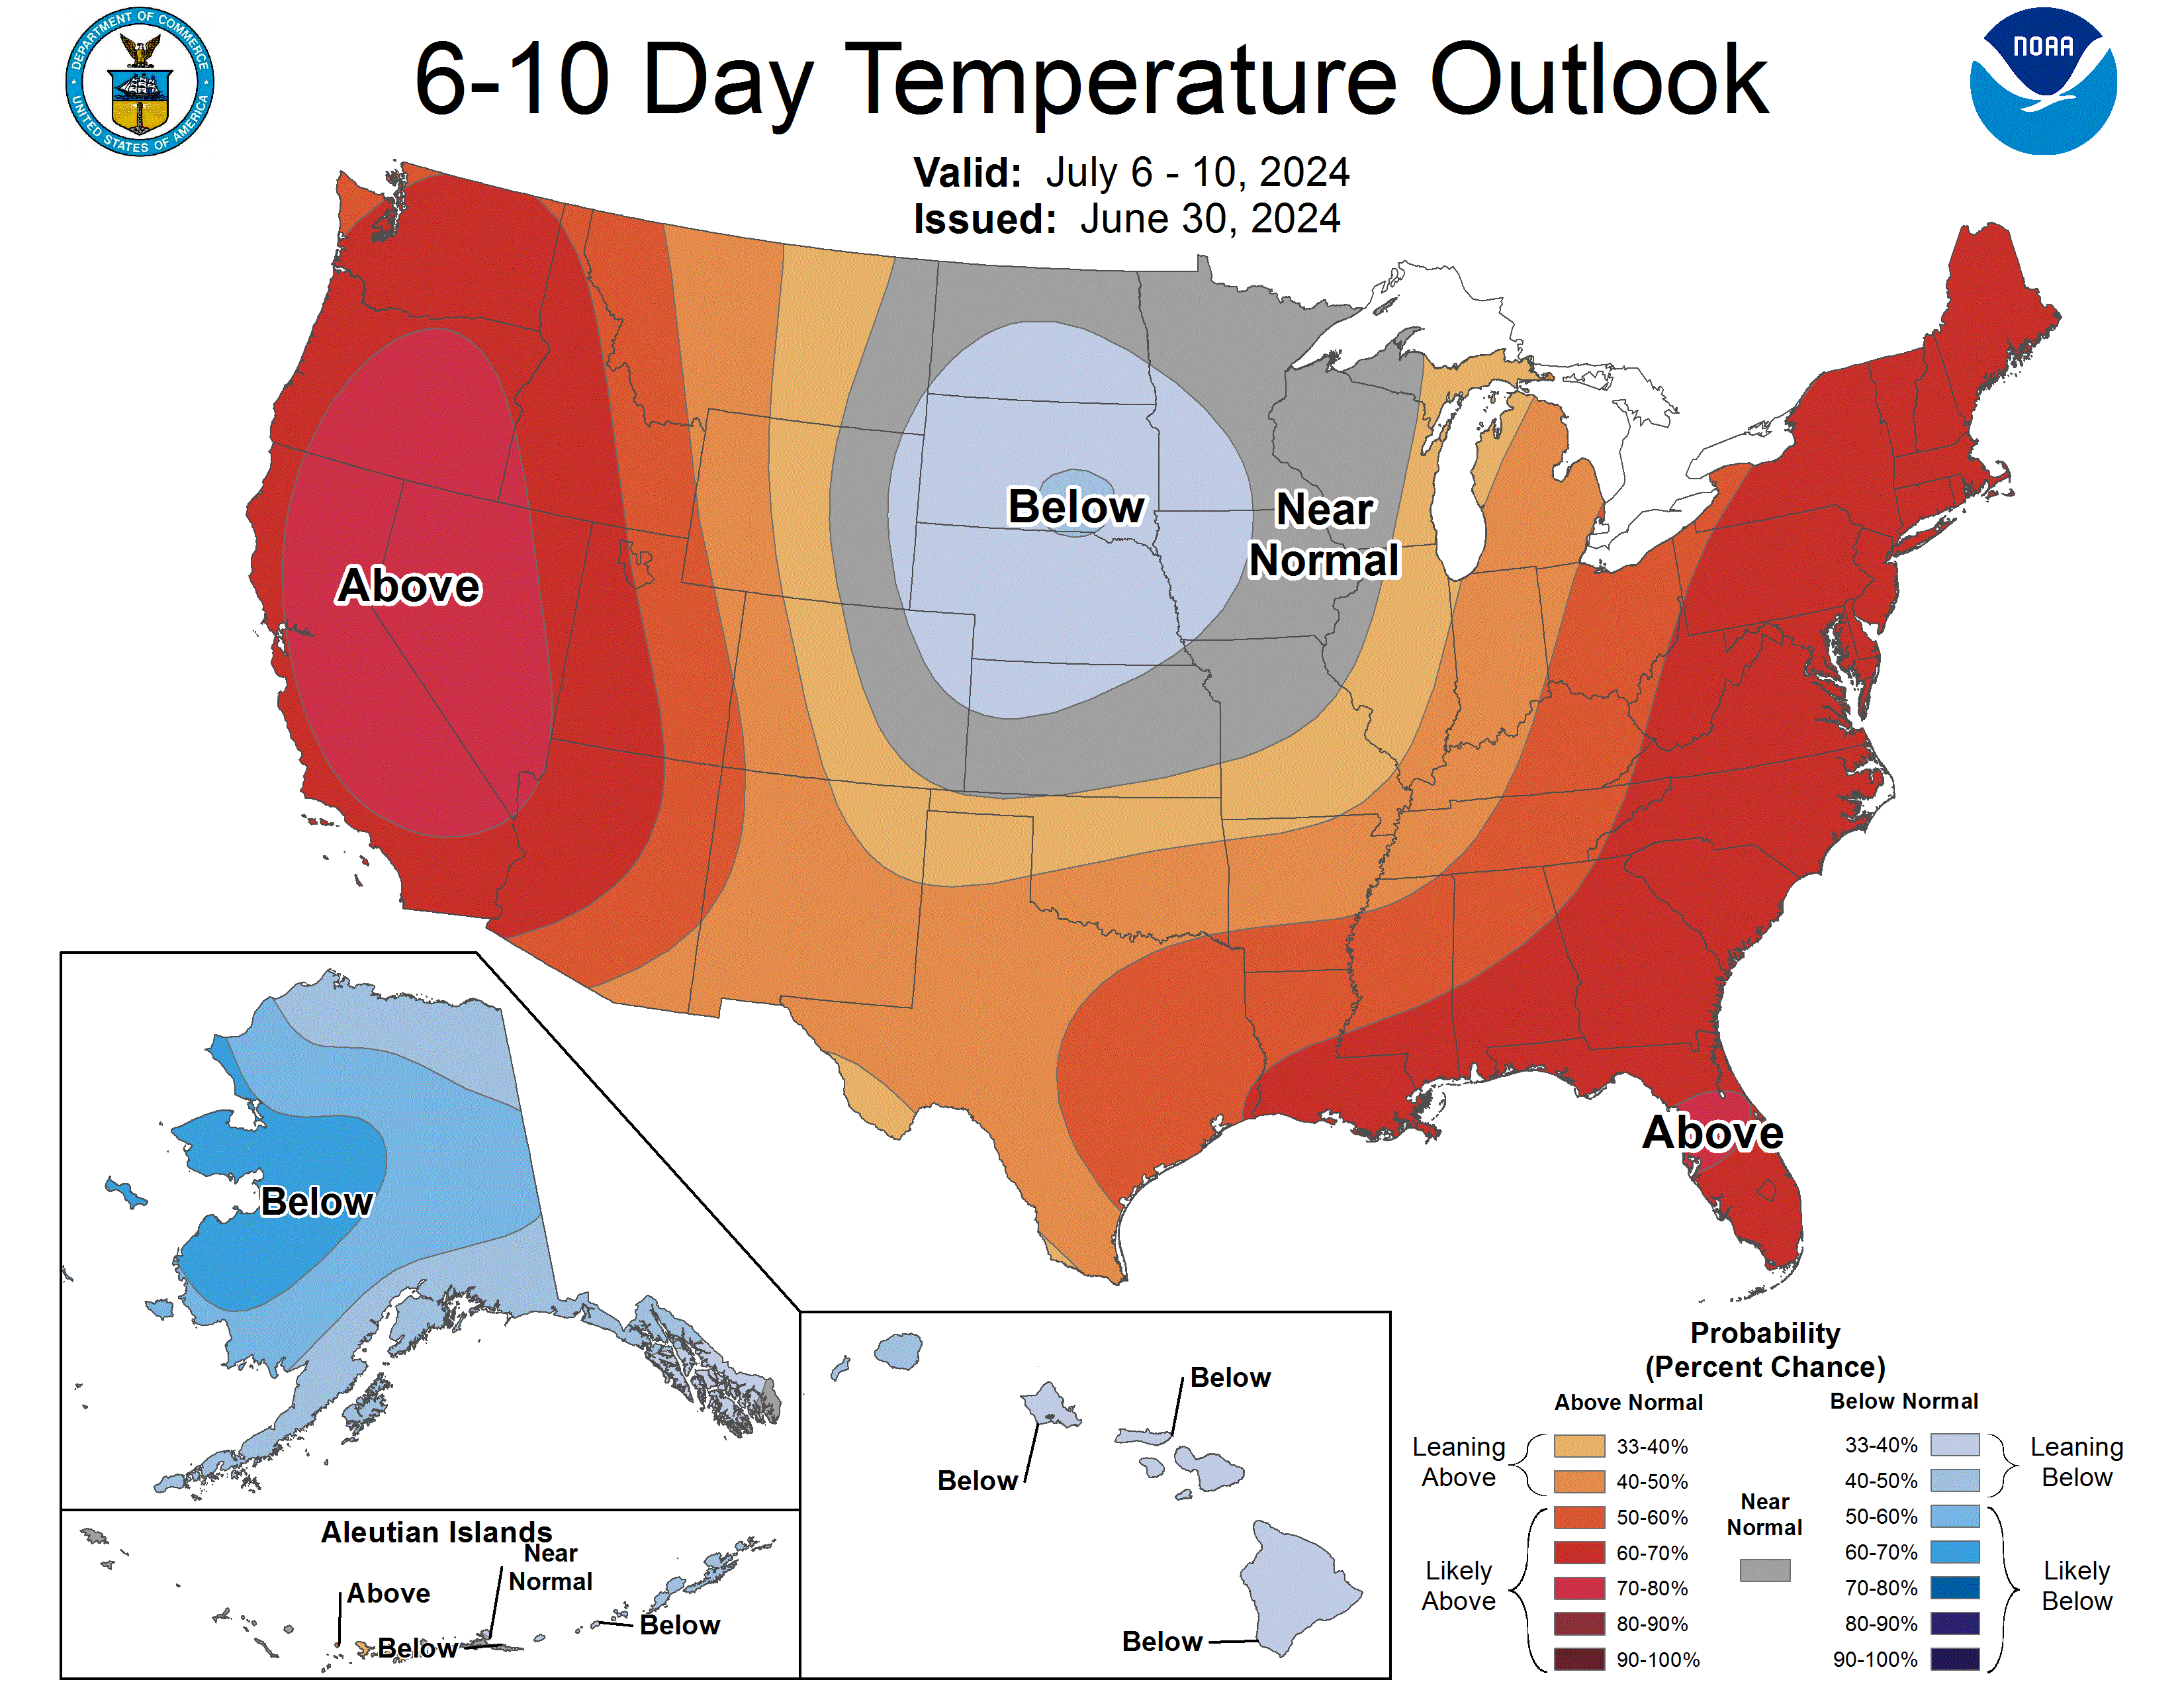 6-10 Day Outlook Temperature